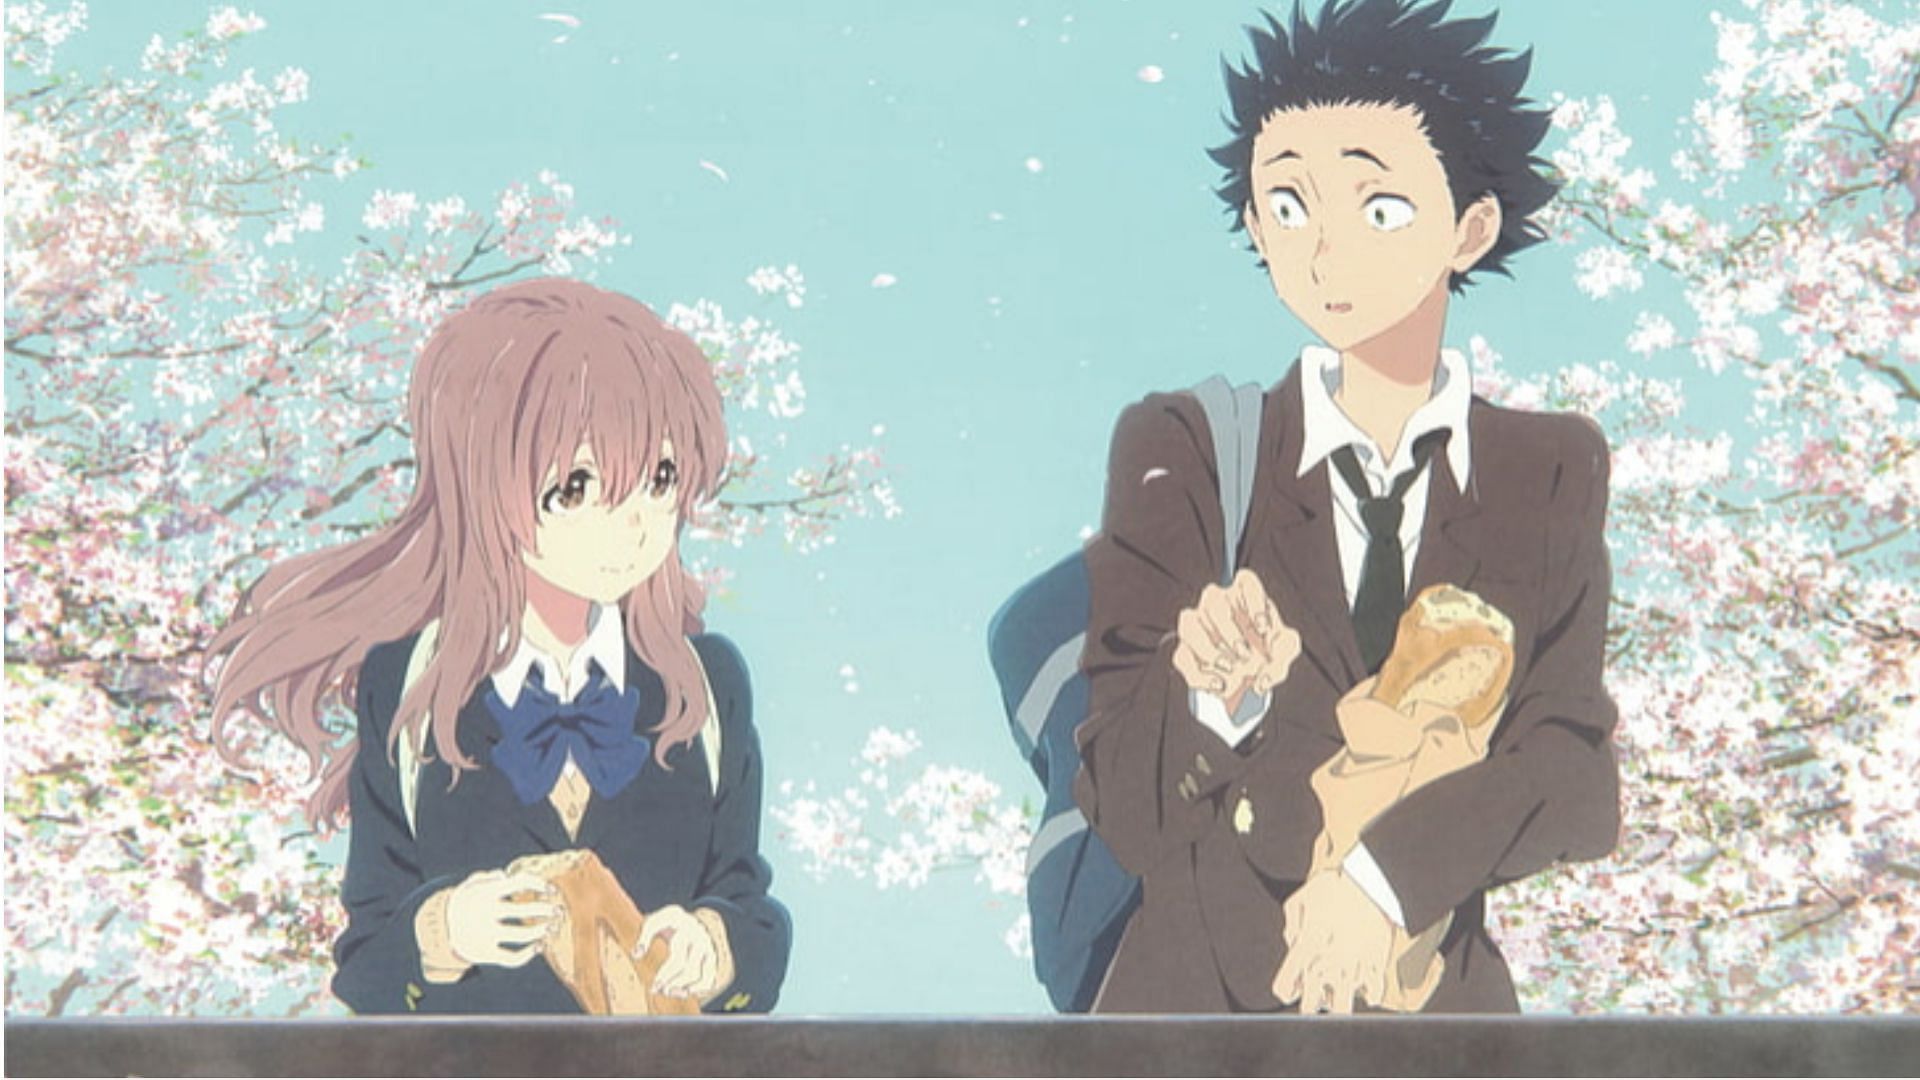 10 anime to watch if you like A Silent Voice